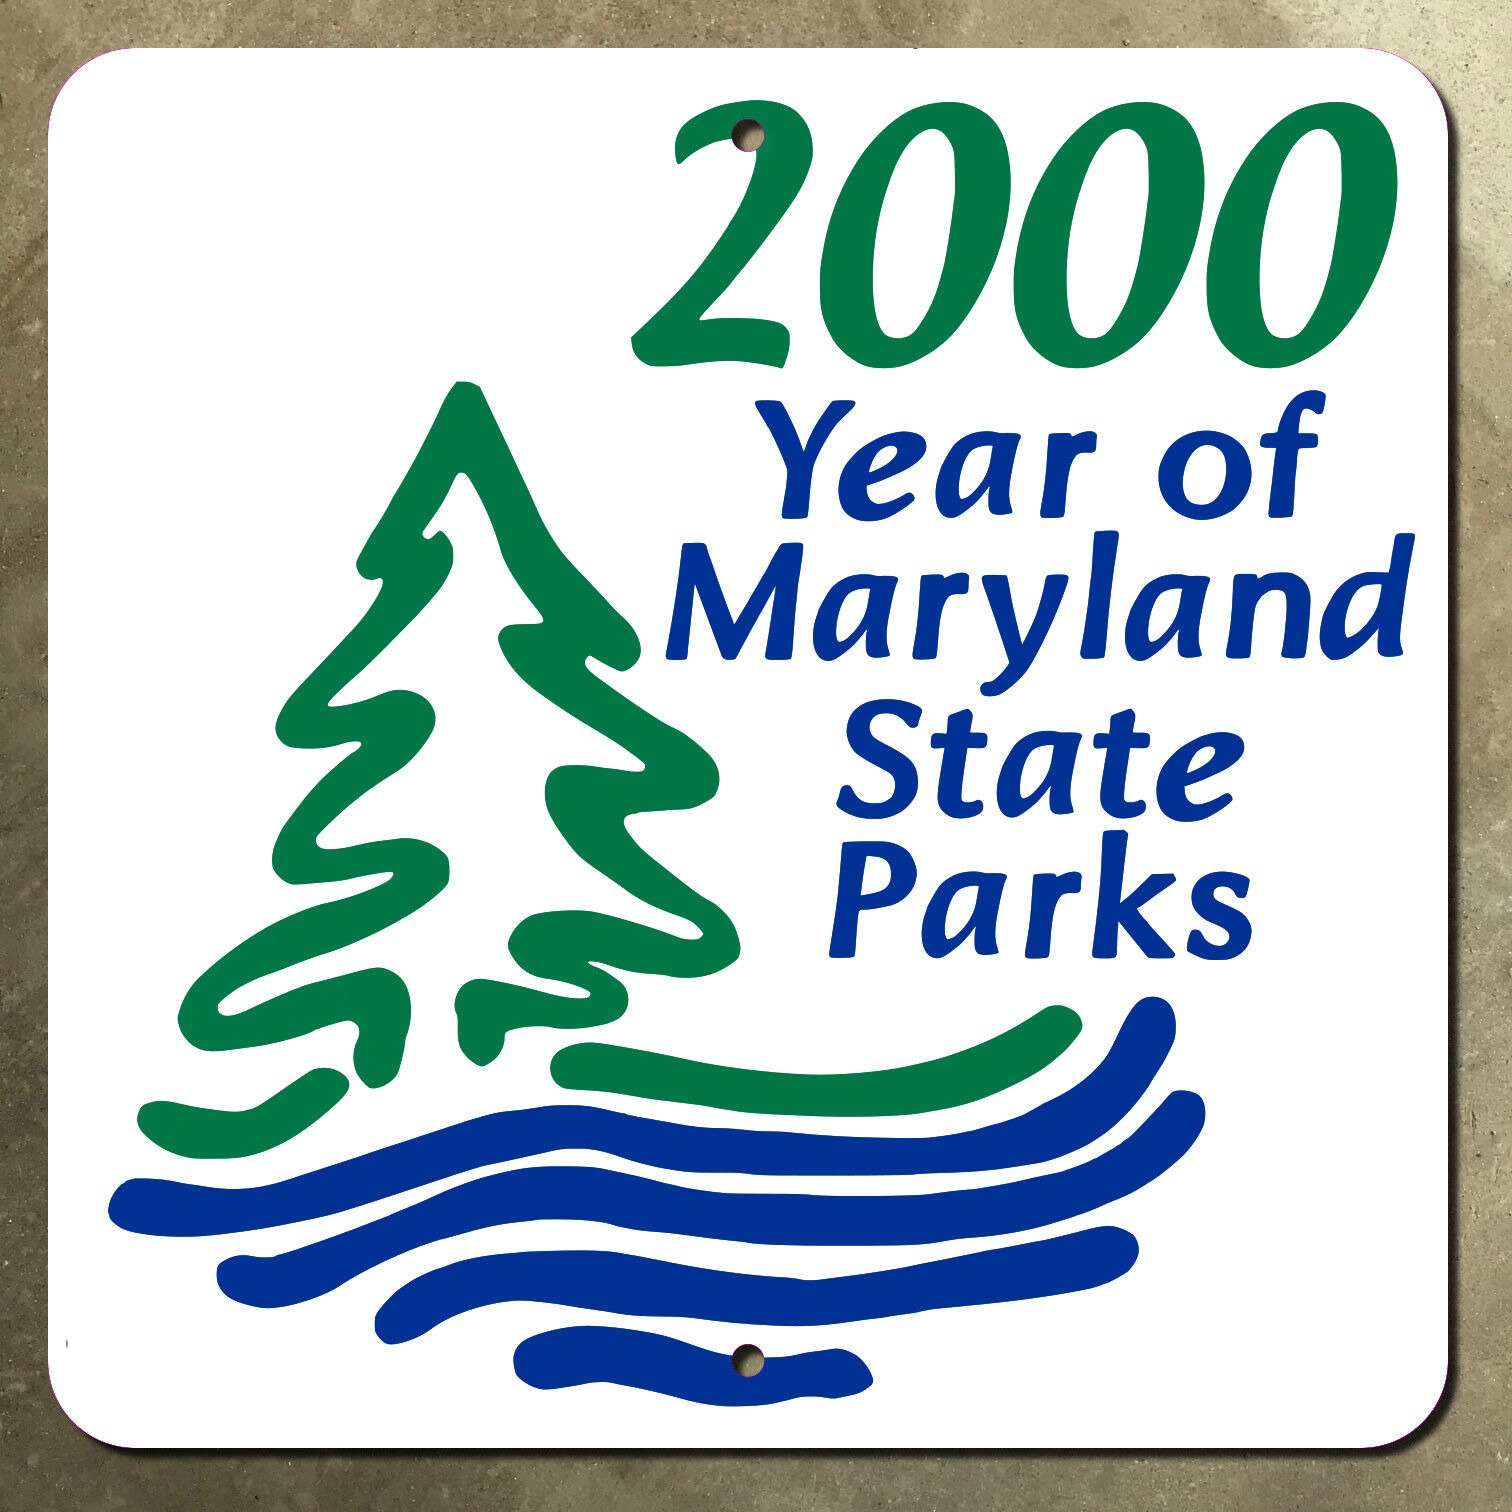 Maryland 2000 Year of state parks celebration highway marker road sign 12x12